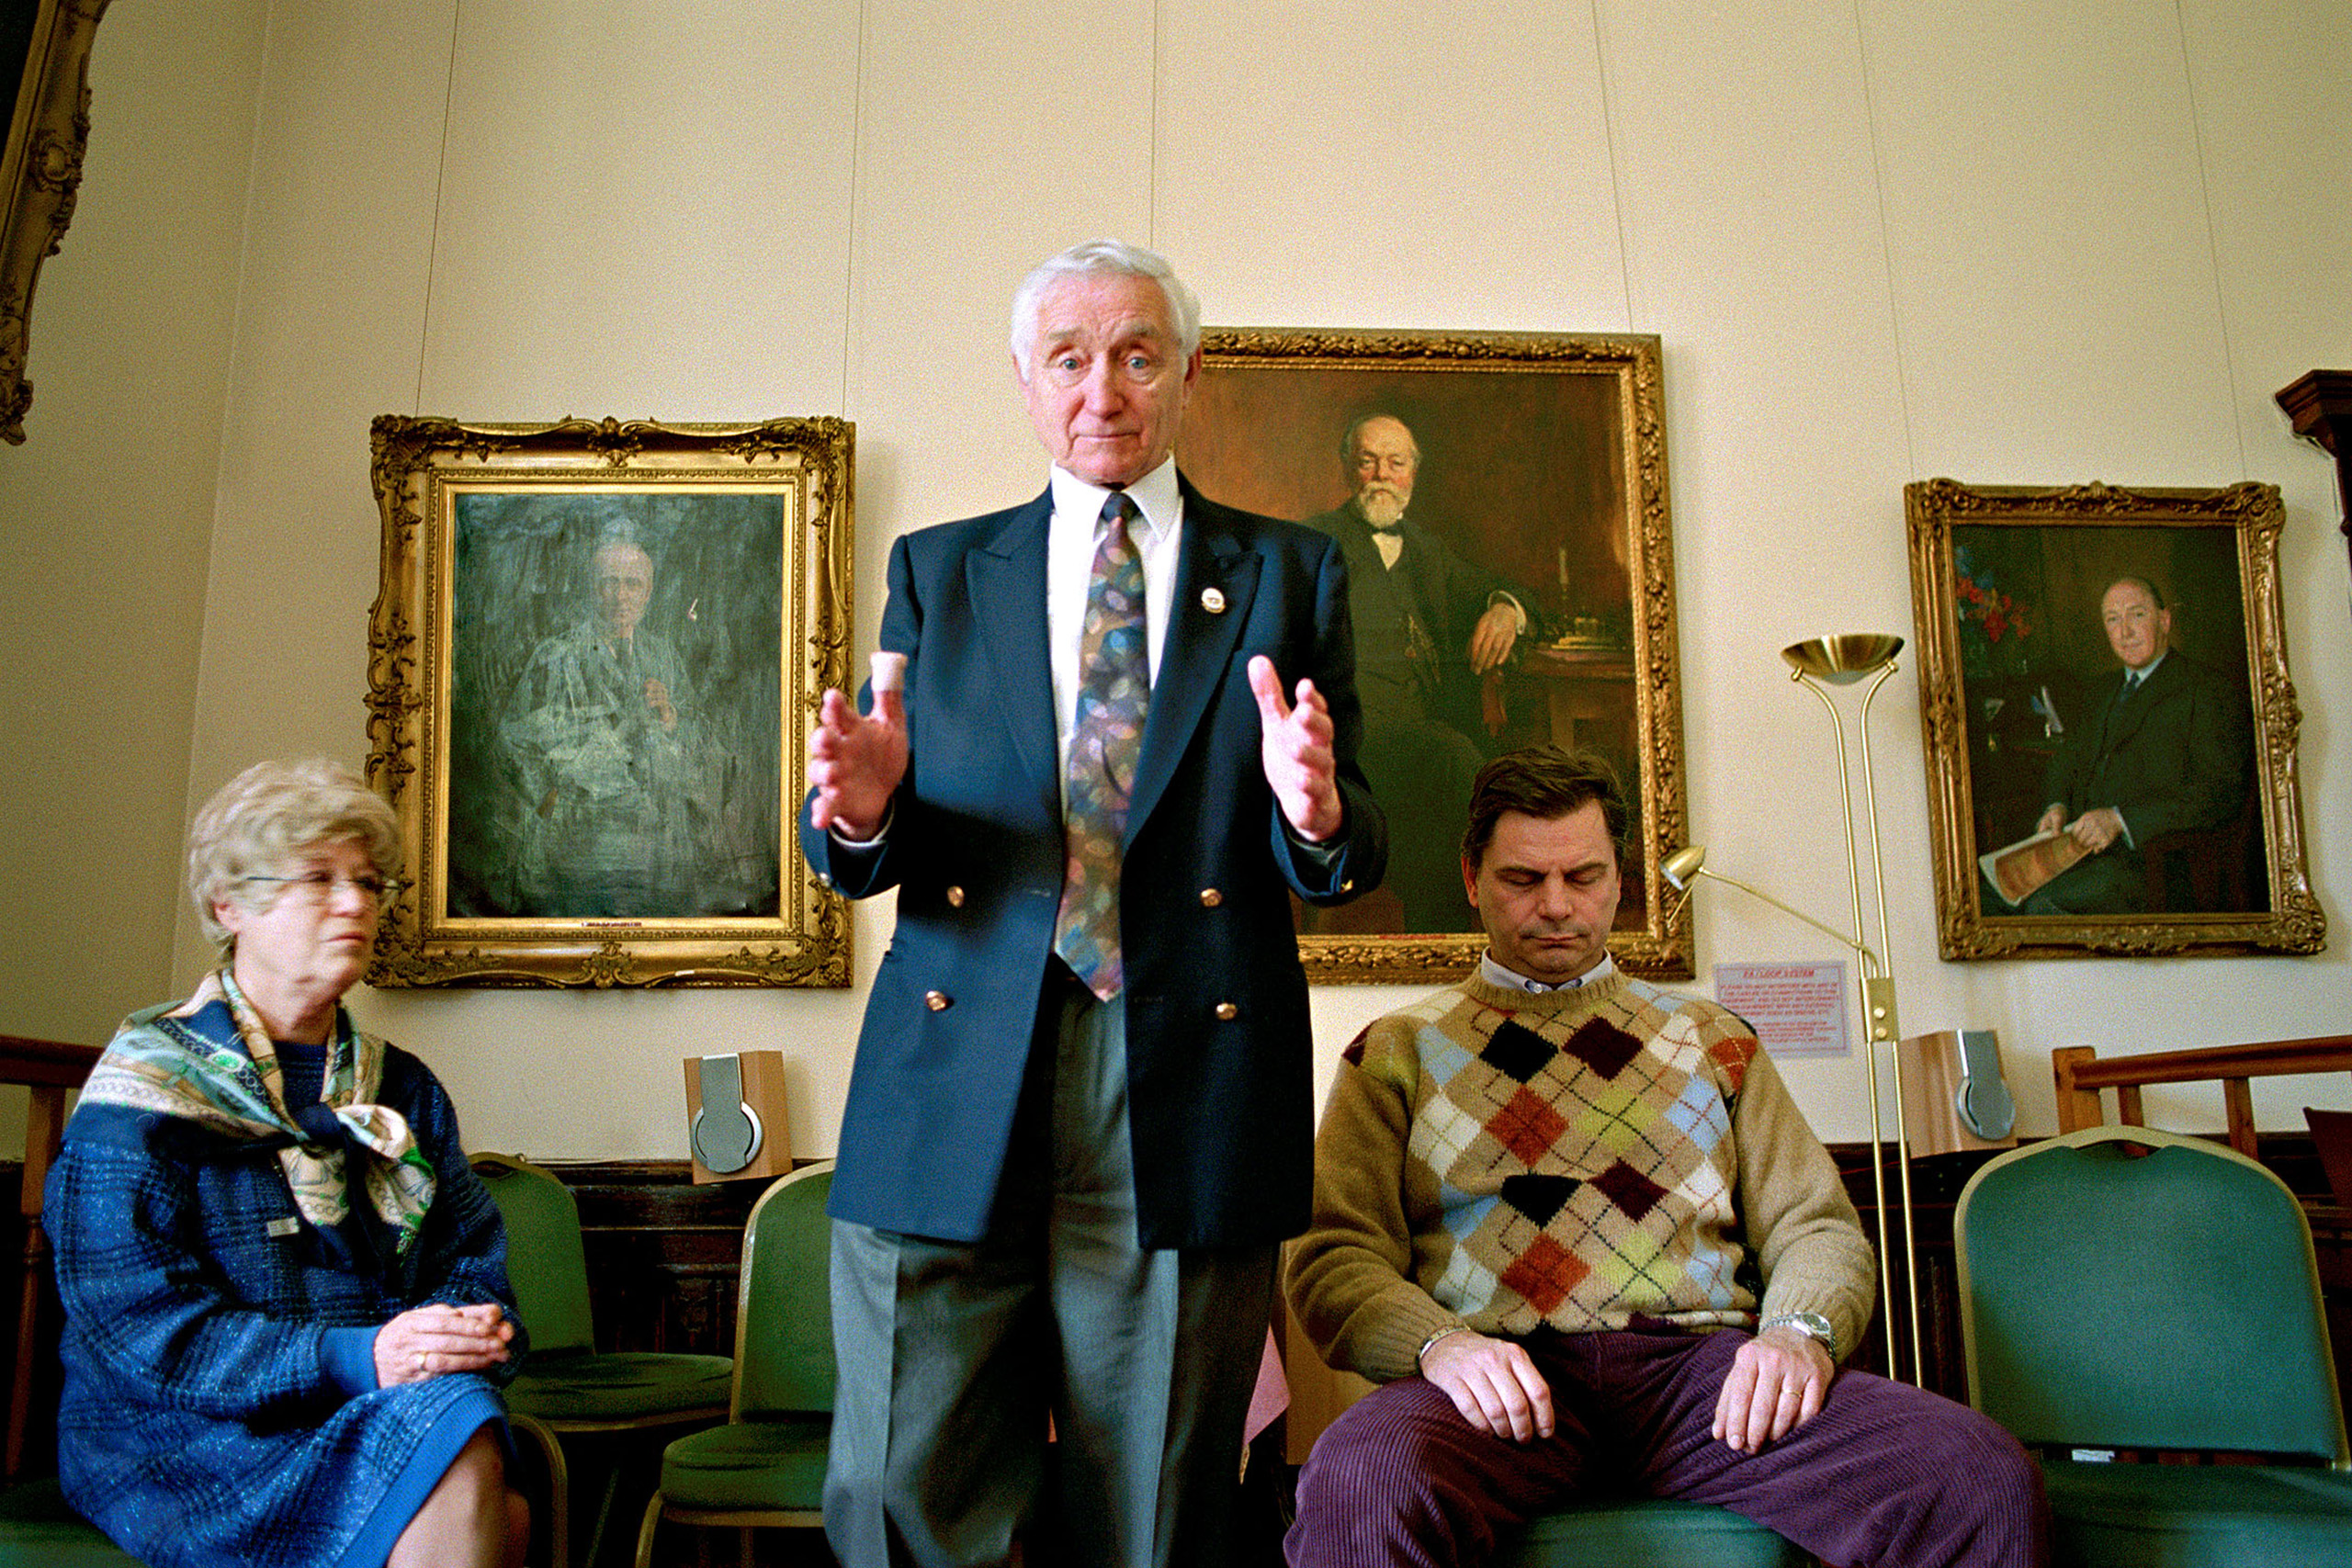 Hypnosis demonstration, Arthur Findlay College, Stansted, England, 2003.